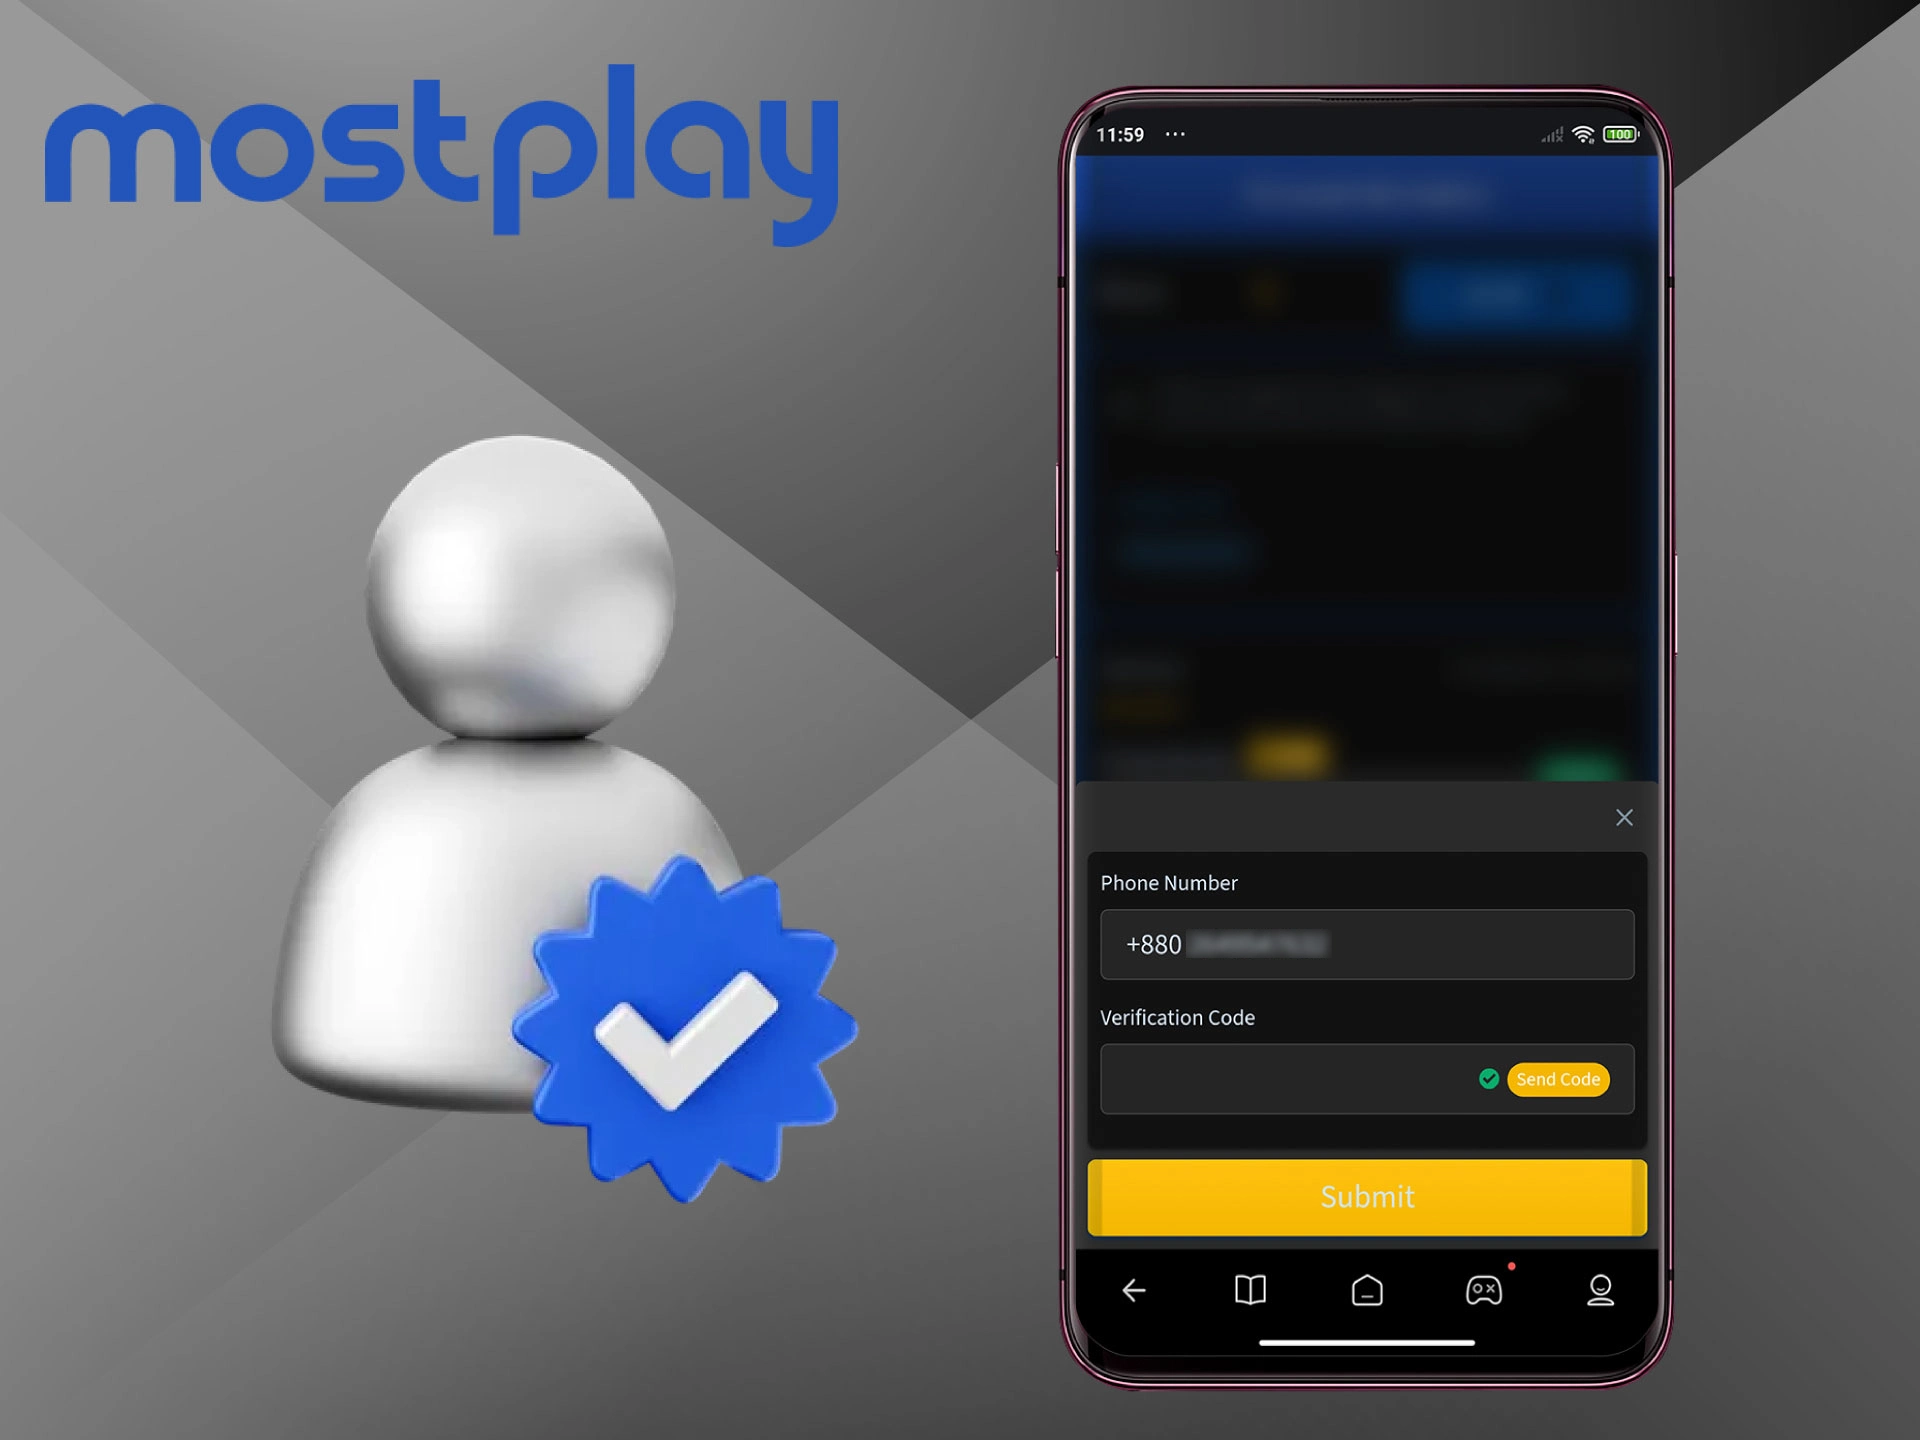 This Mostplay procedure is mandatory, without it you will not be able to deposit and withdraw funds.